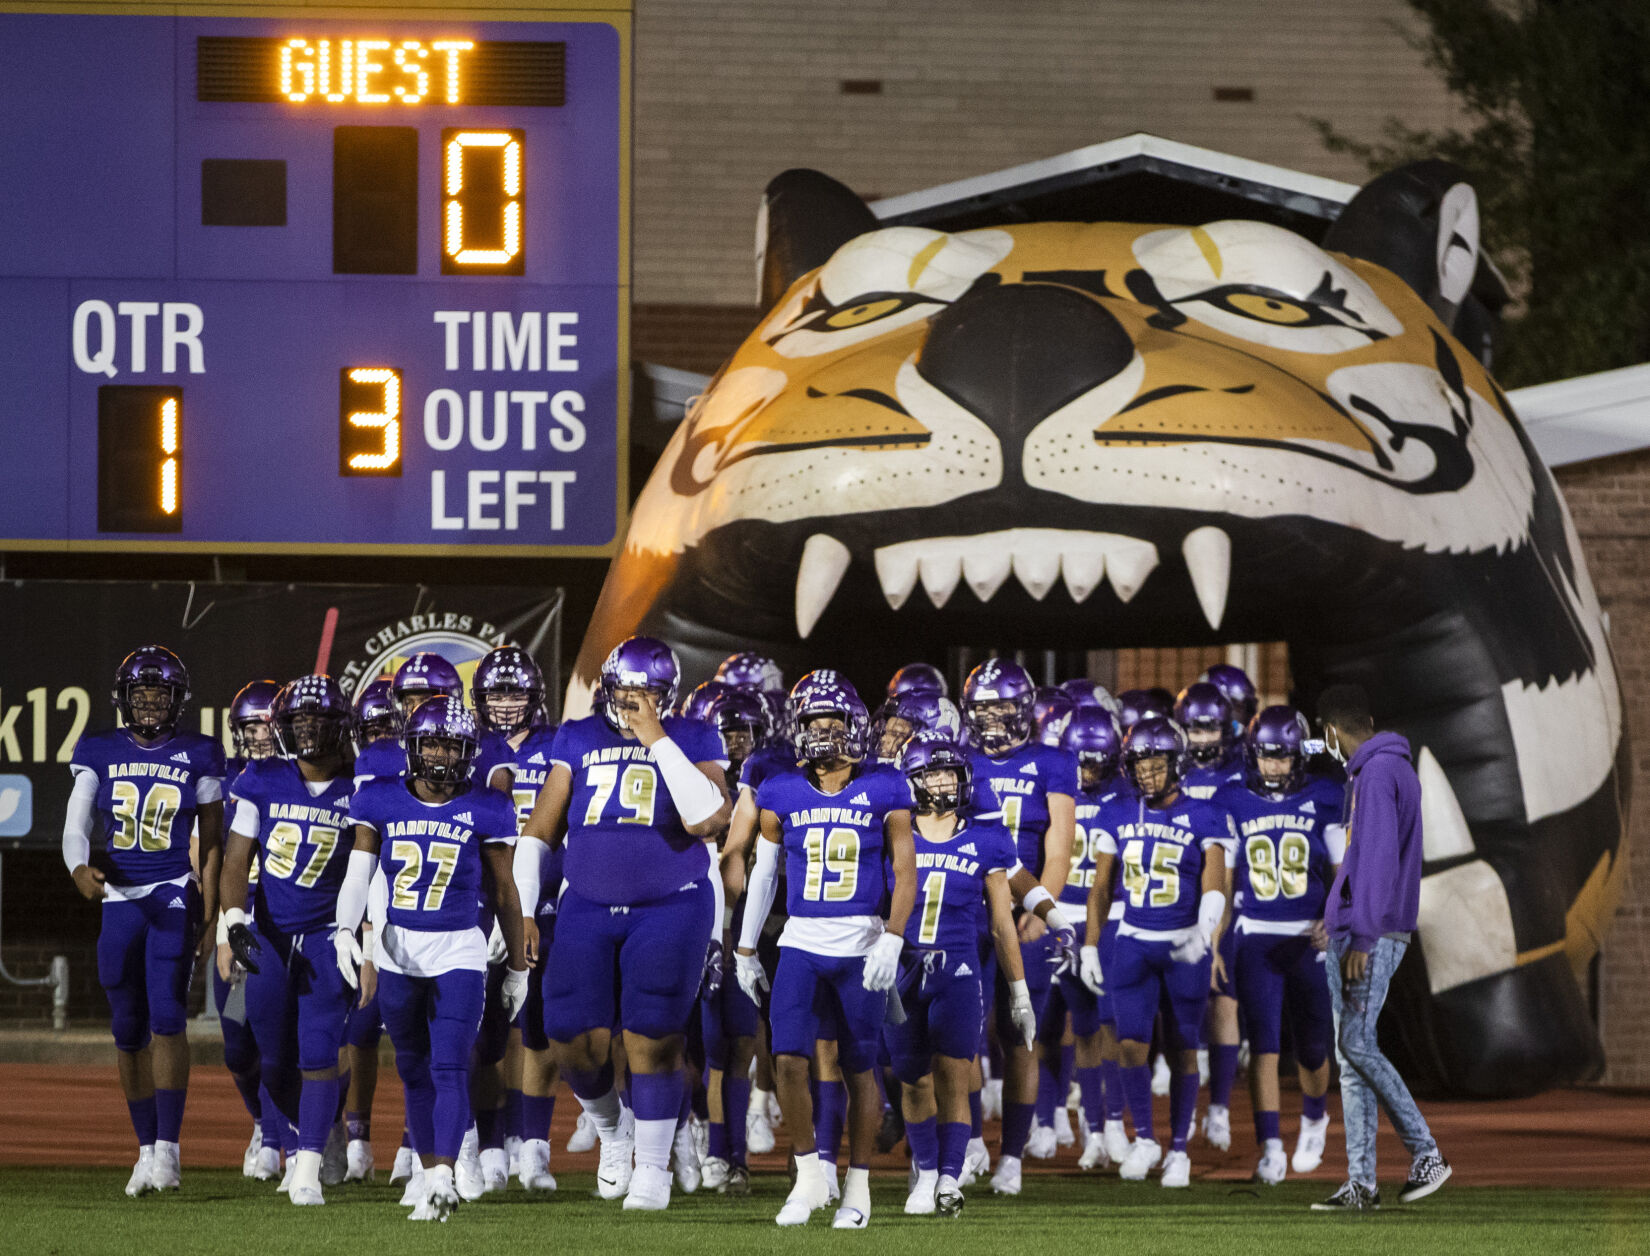 Hahnville High School Football Coach Daniel Luquet Resigns After 4 Seasons Due to Lack of Wins